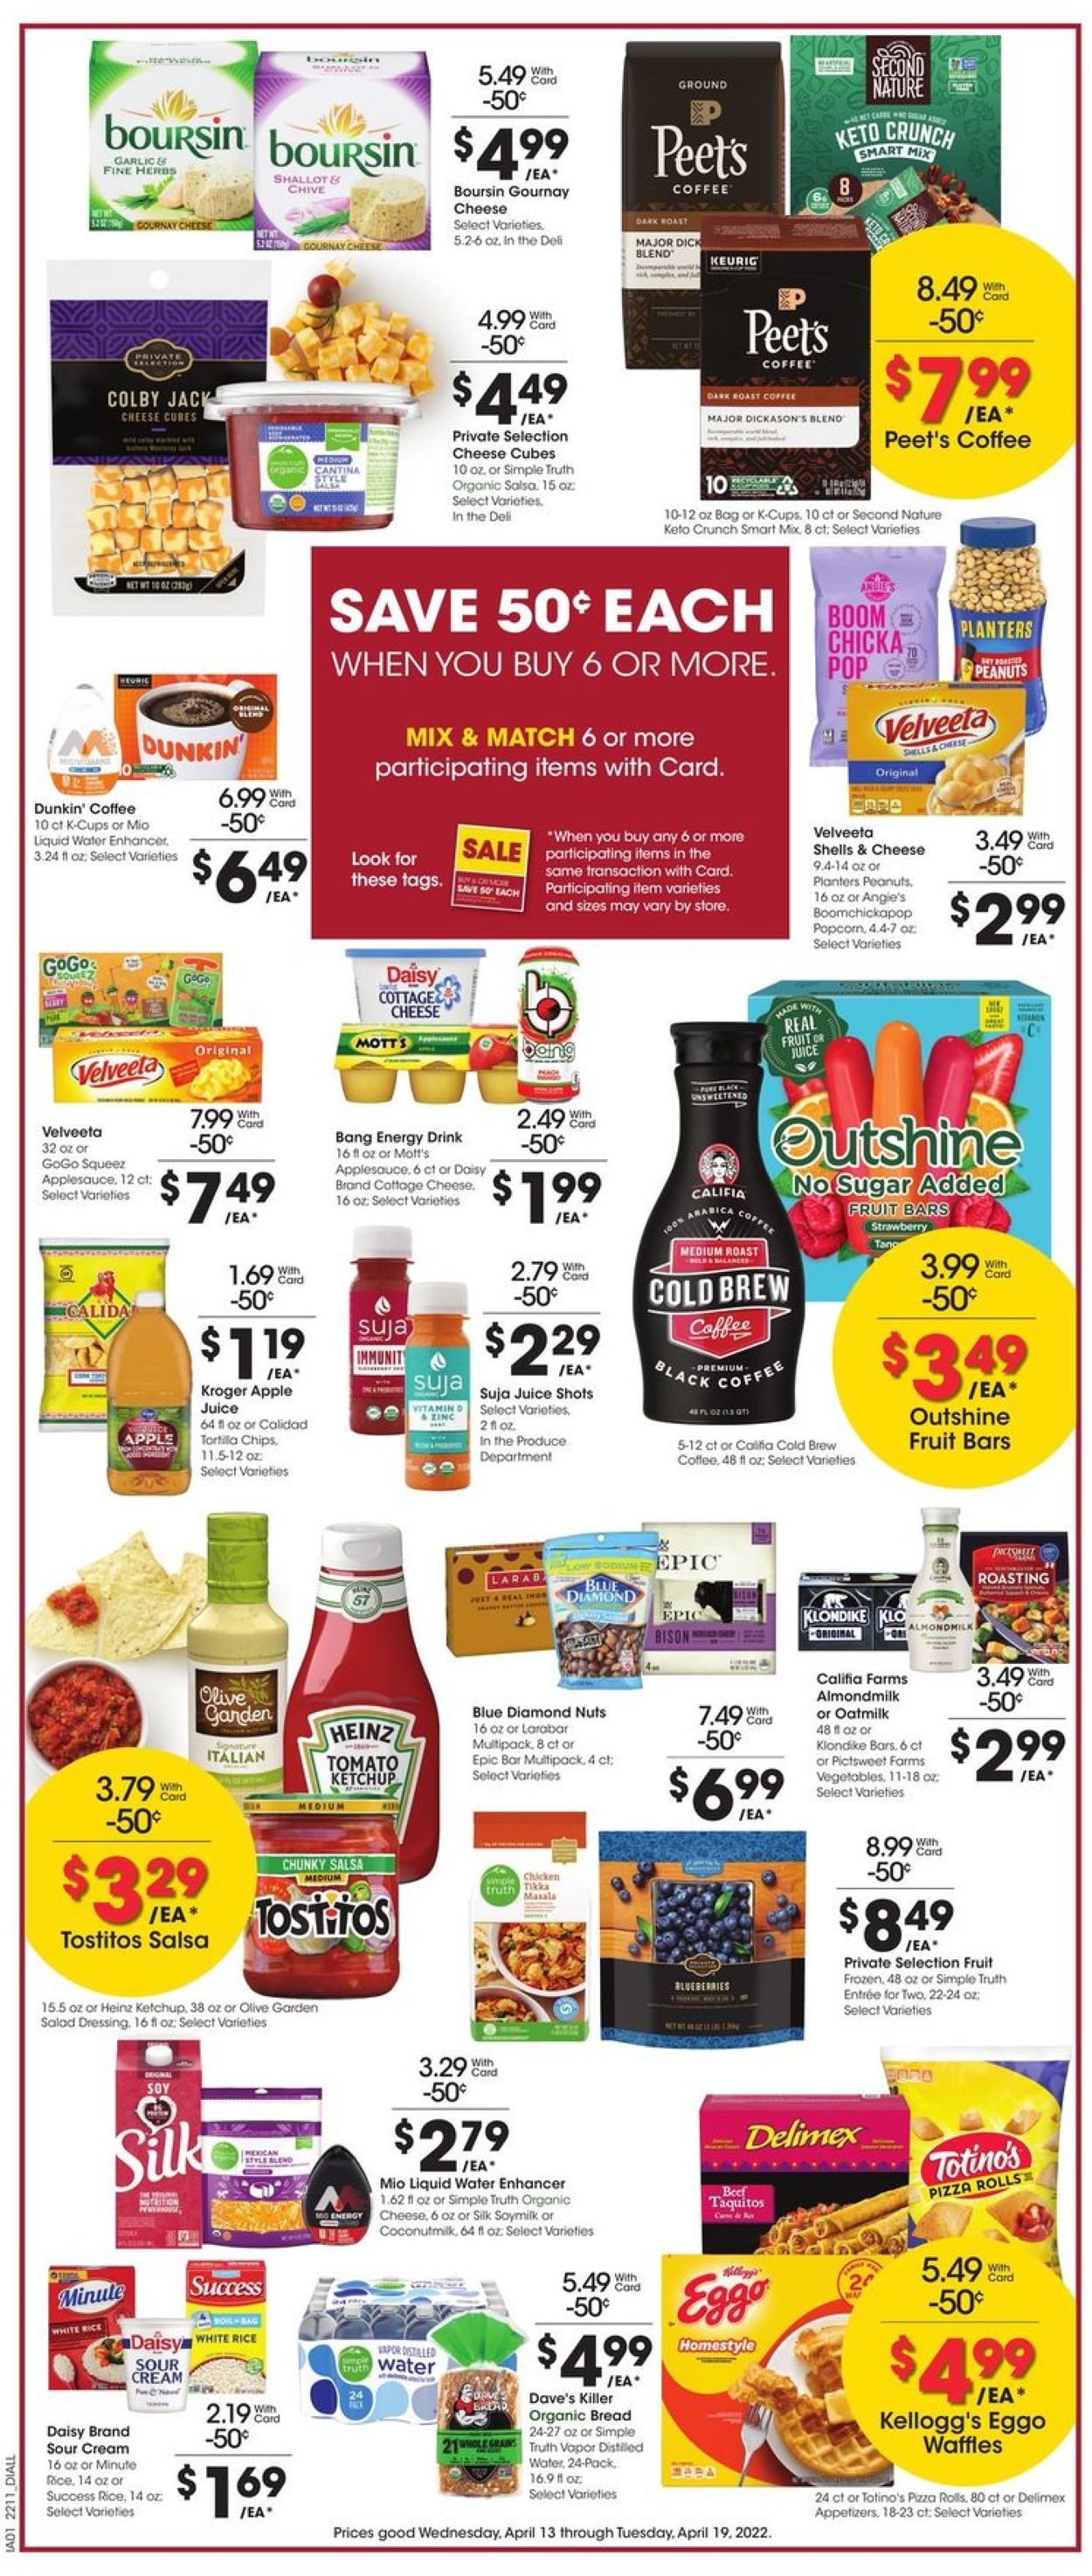 Gerbes Super Markets EASTER AD 2022 Weekly Ad Circular - valid 04/13-04/19/2022 (Page 5)